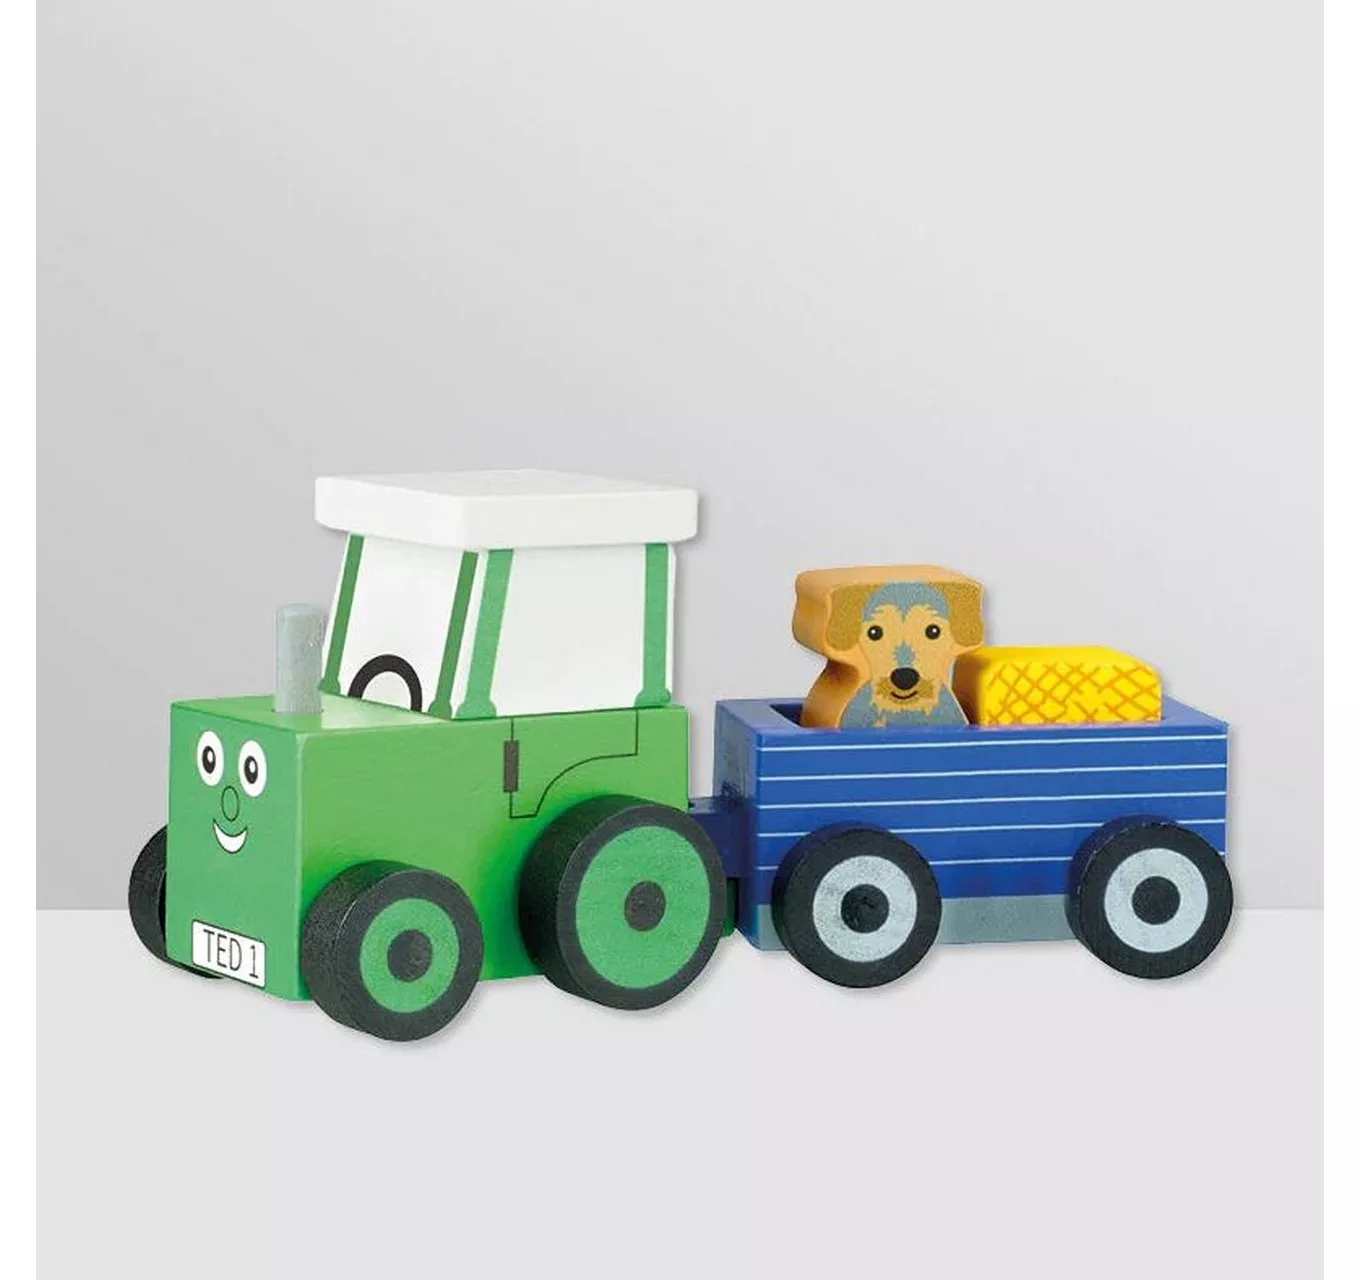 Tractor Ted & Trailer Toy